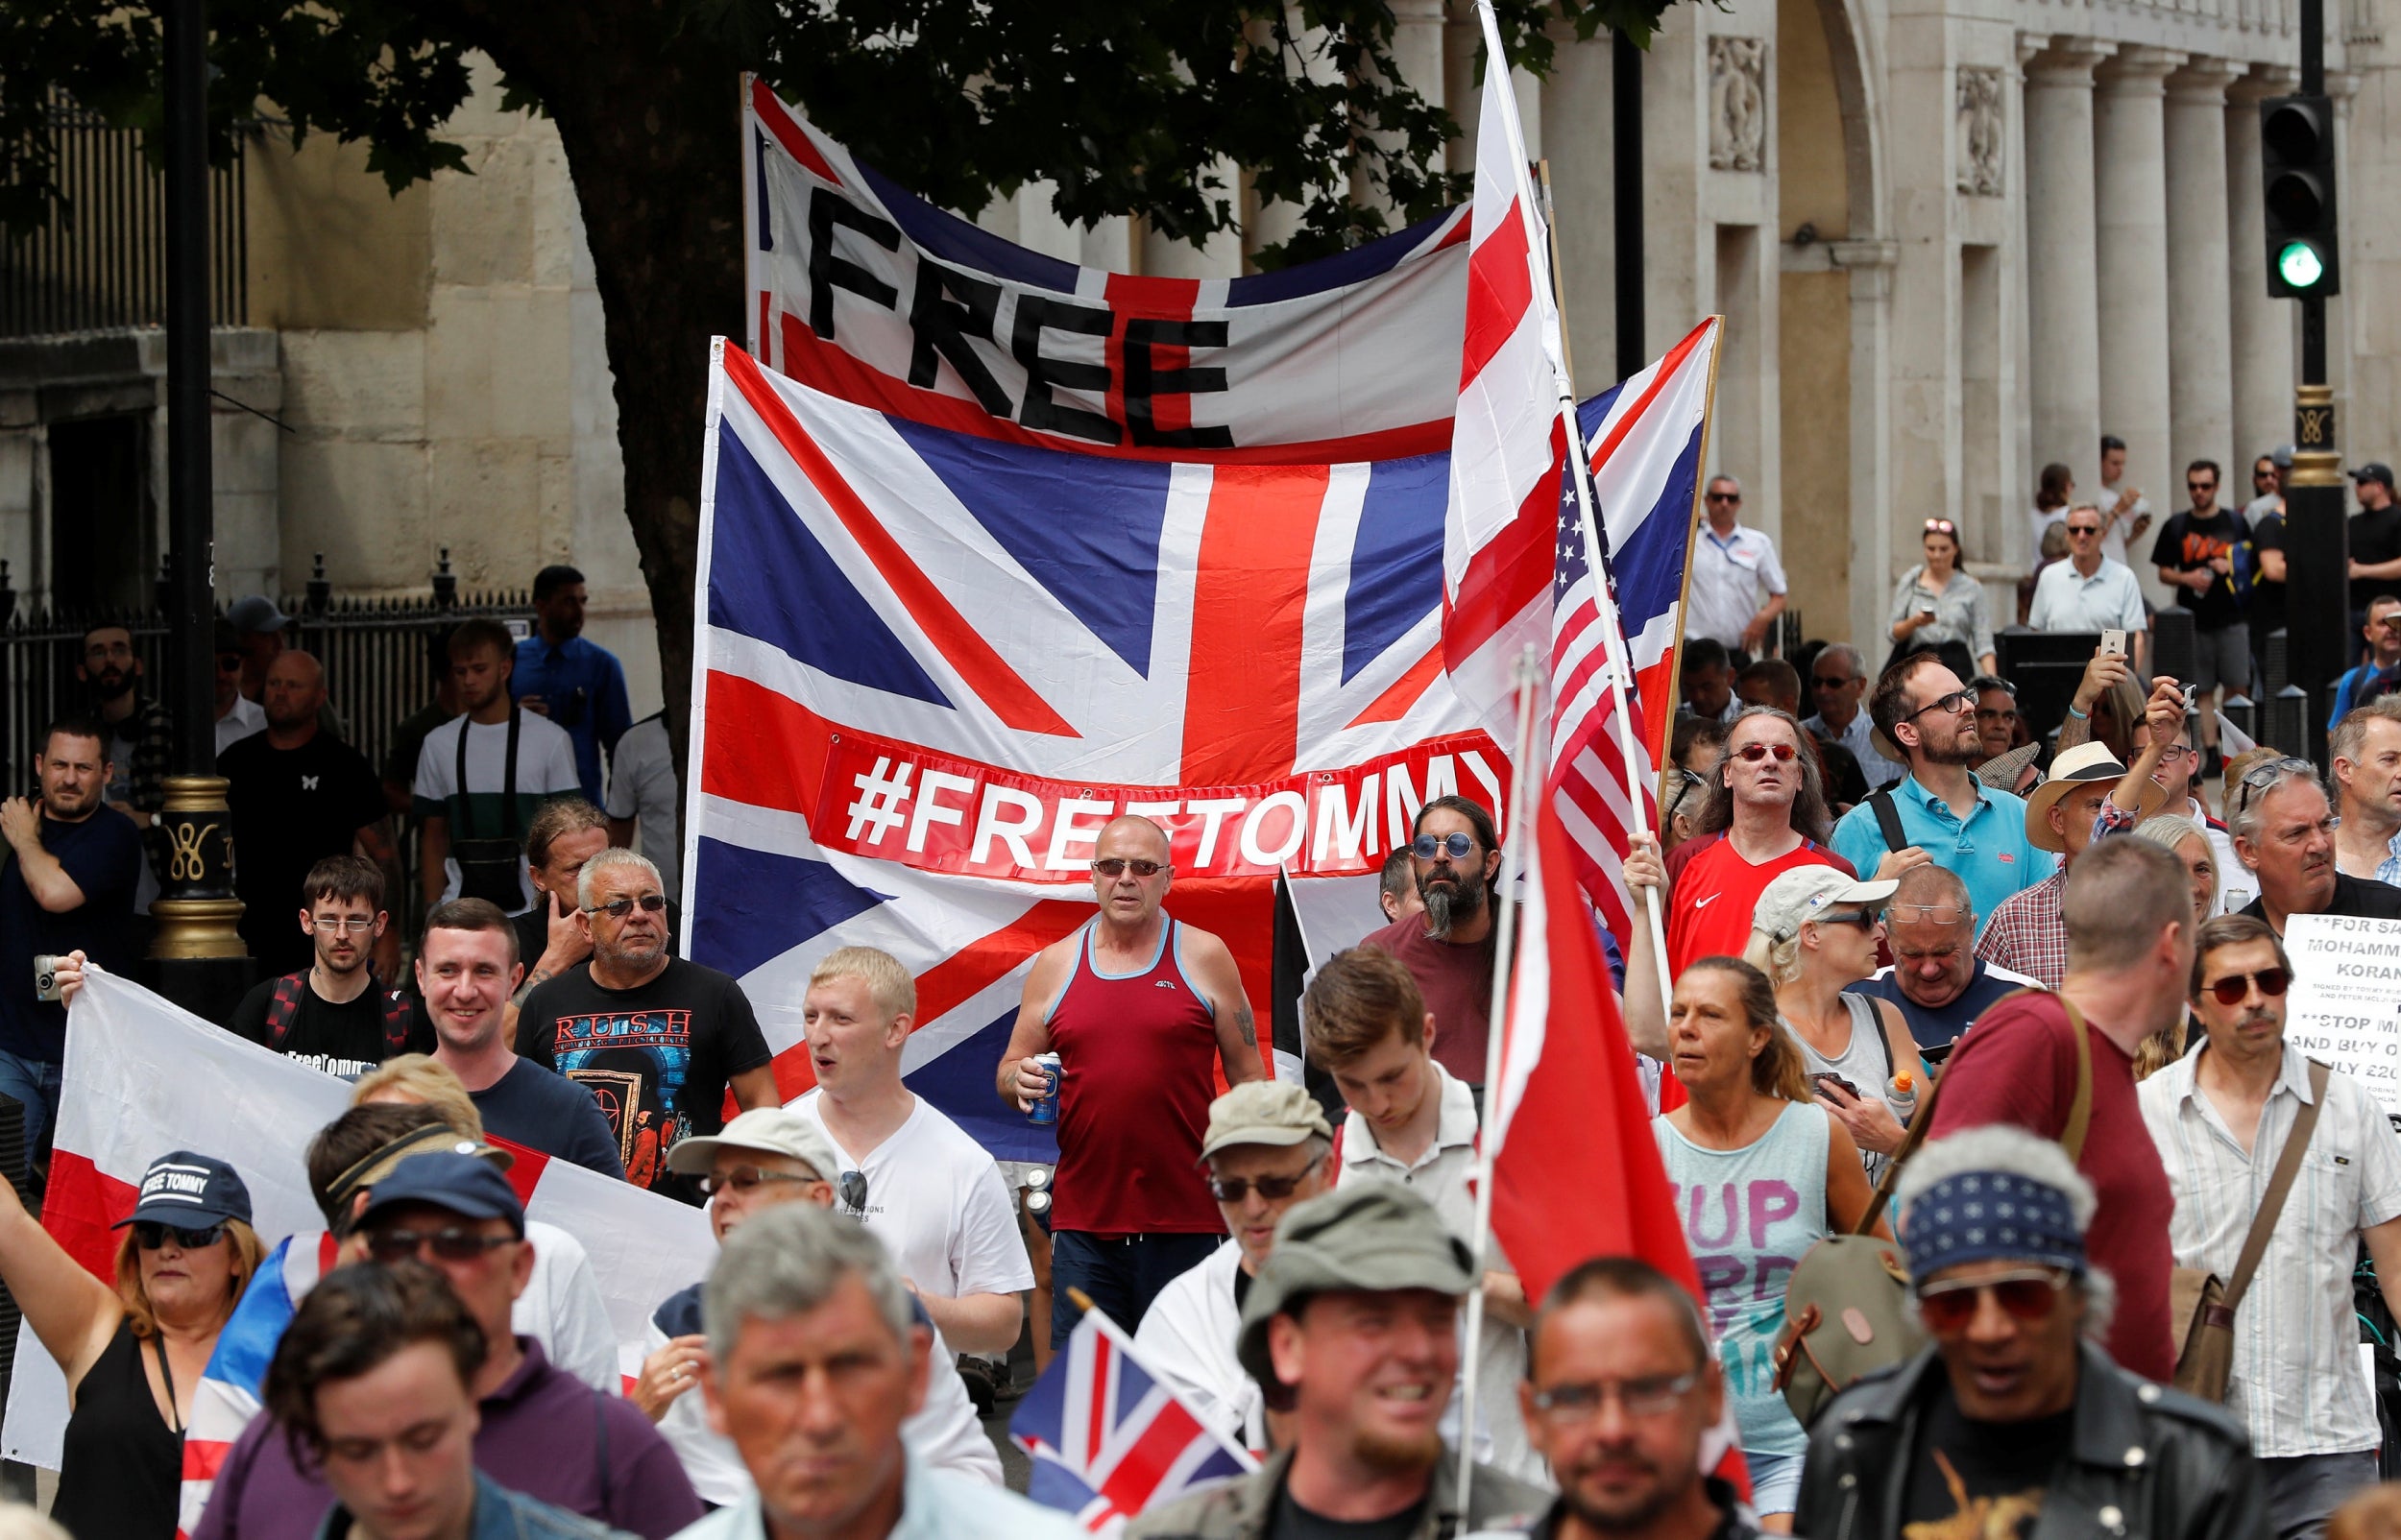 A 'Free Tommy' protest in London last year (Reuters)